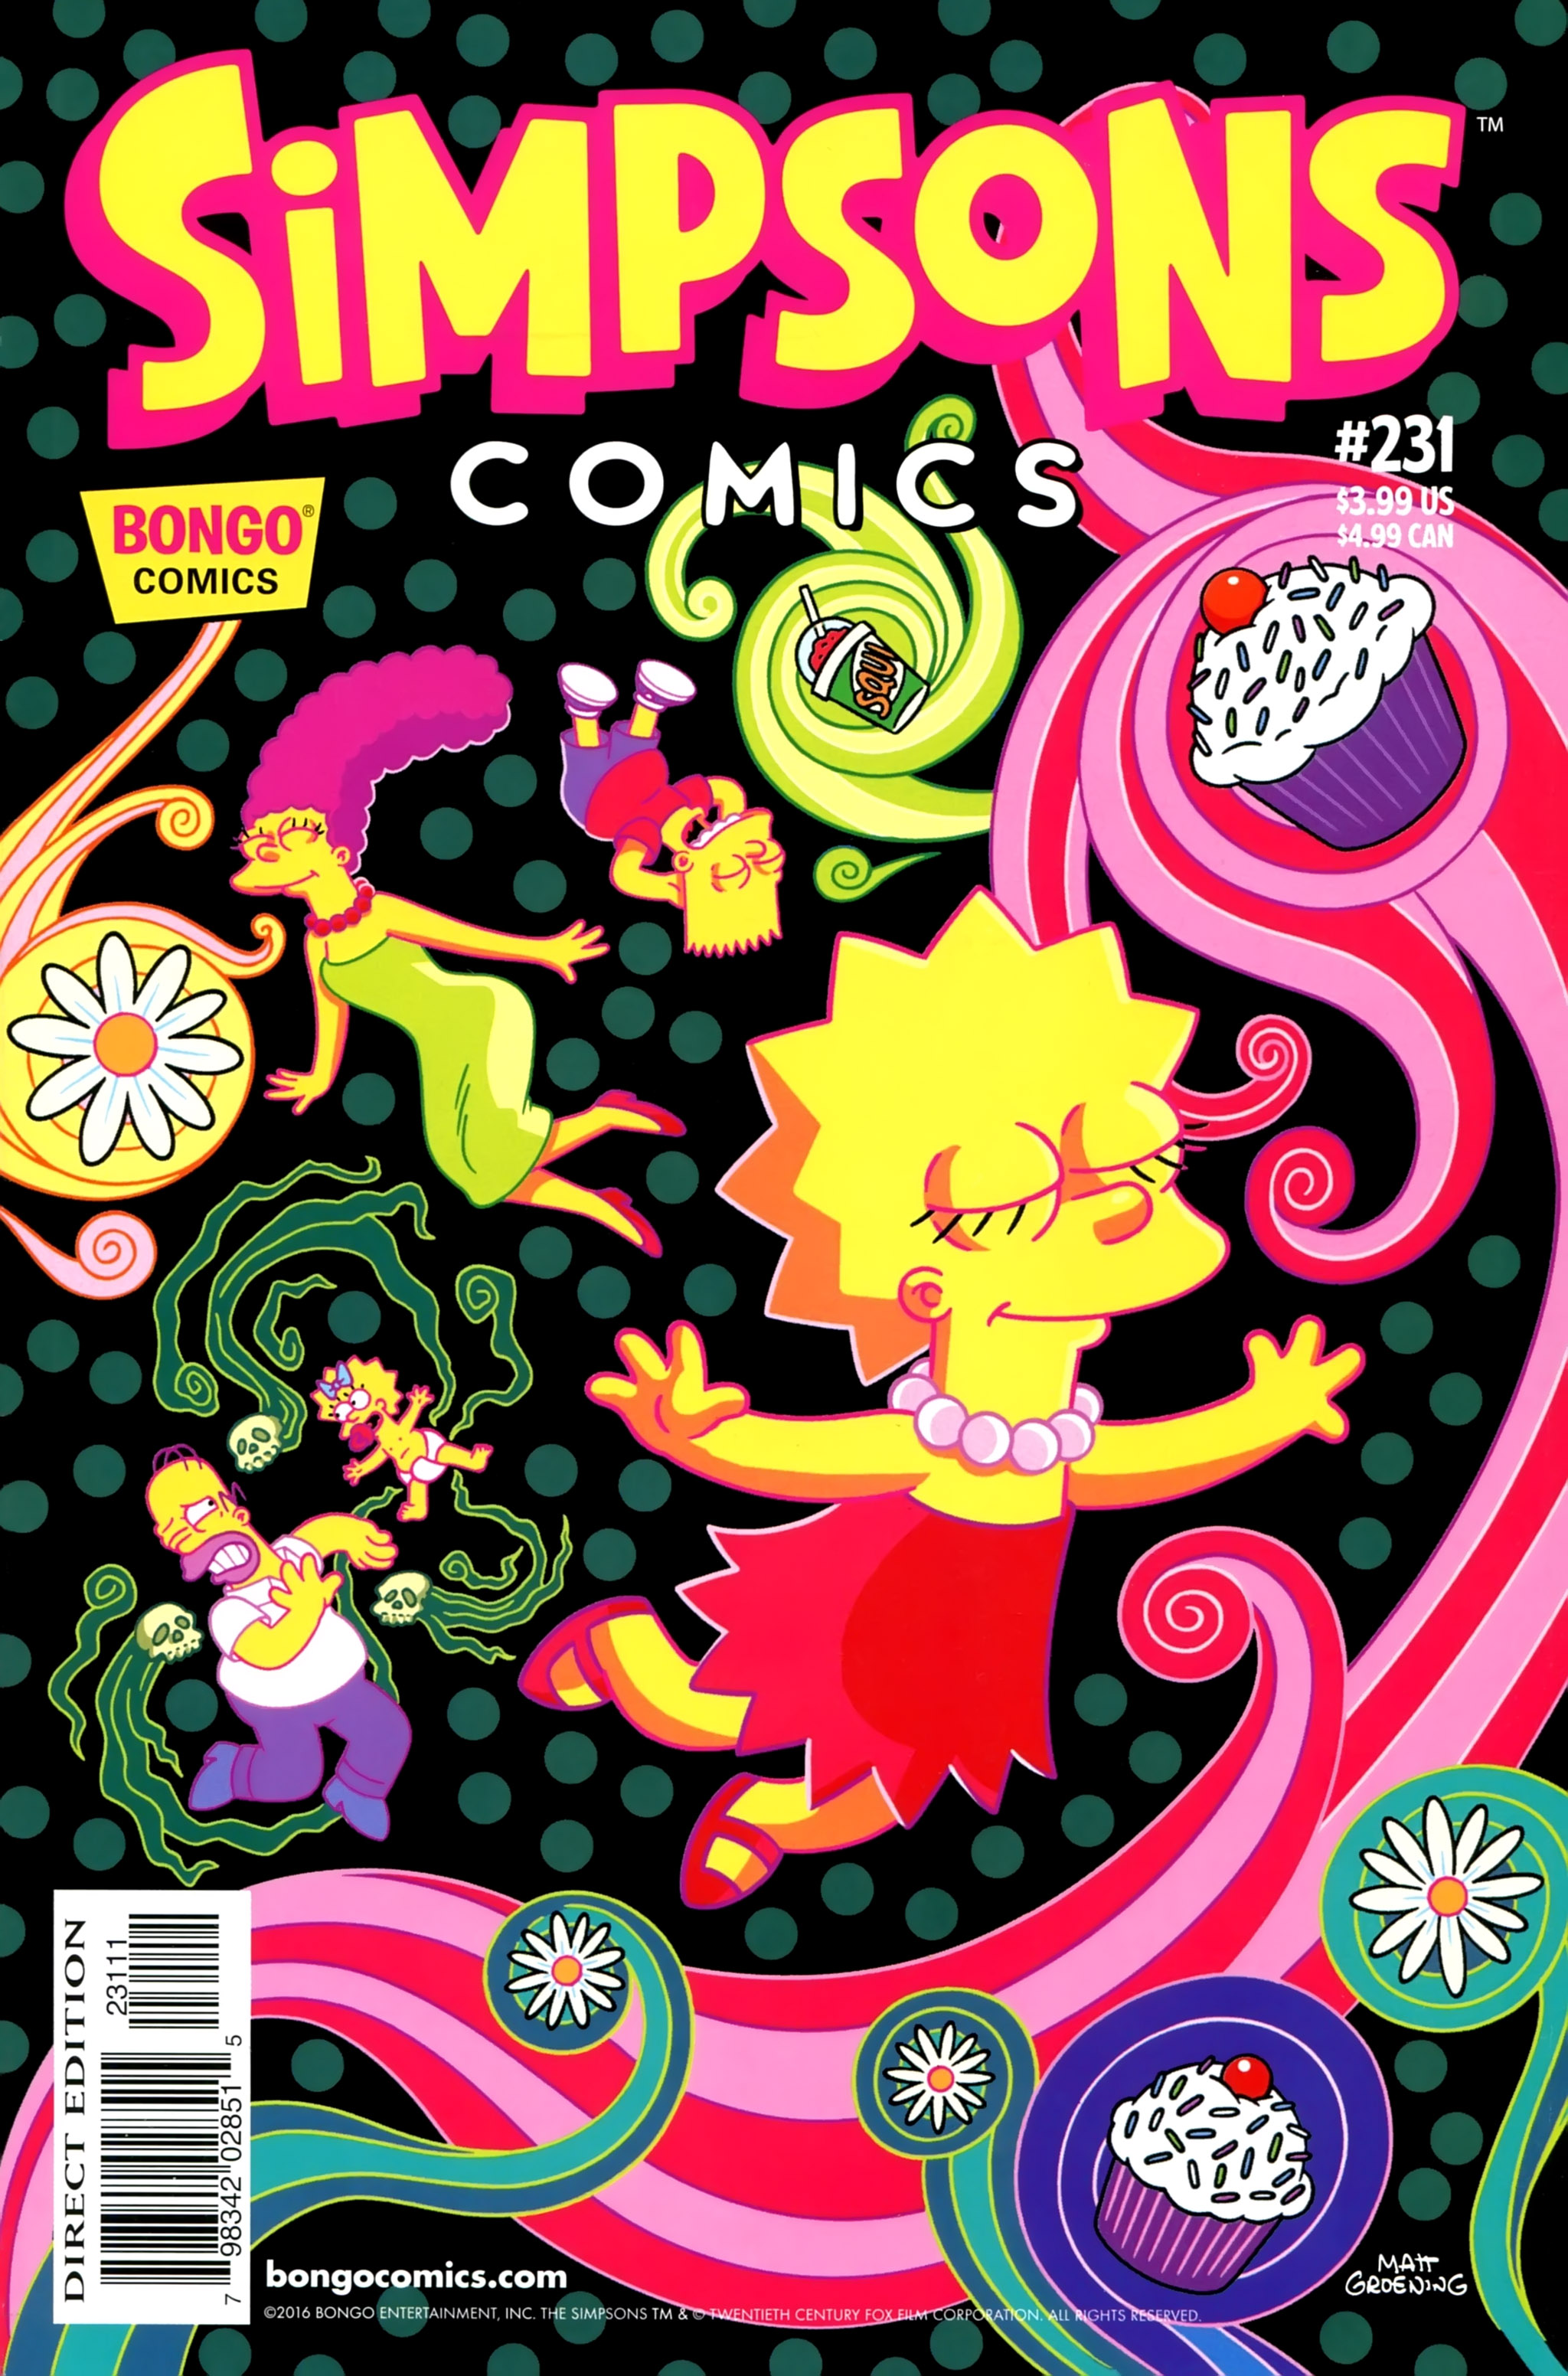 Simpsons Comics (1993-): Chapter 231 - Page 1